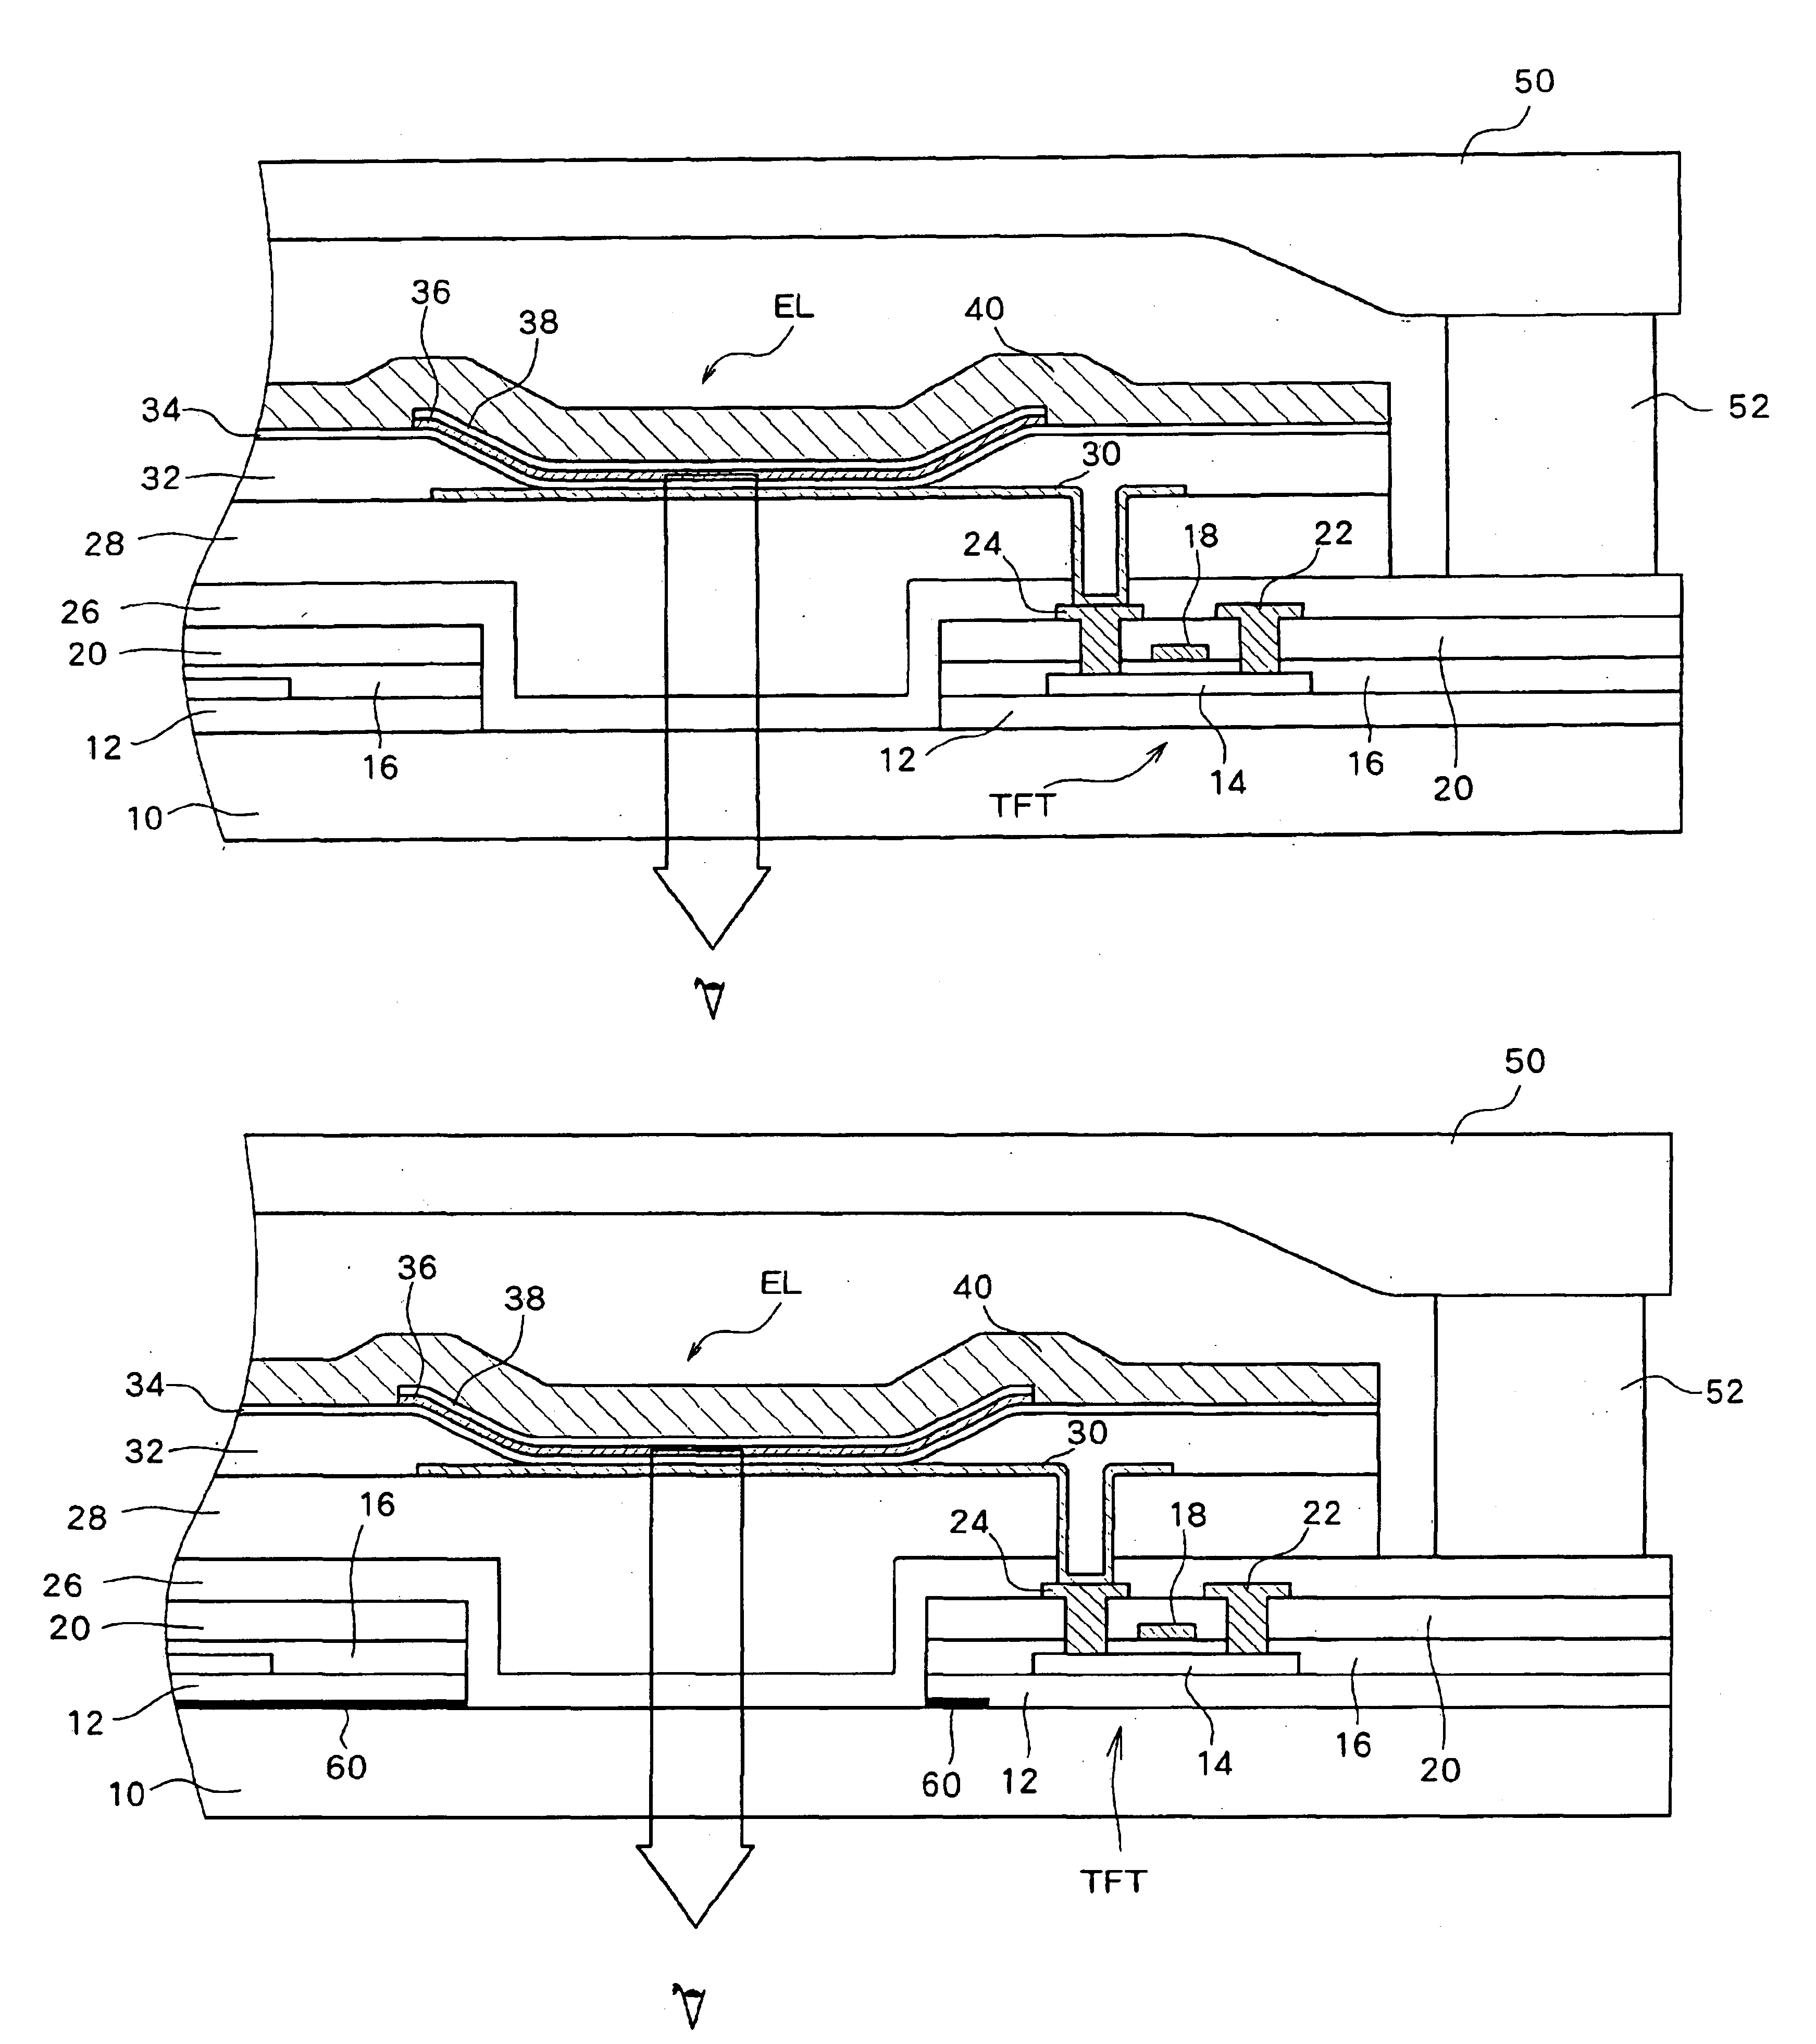 Electroluminescence display apparatus with opening in silicon oxide layer